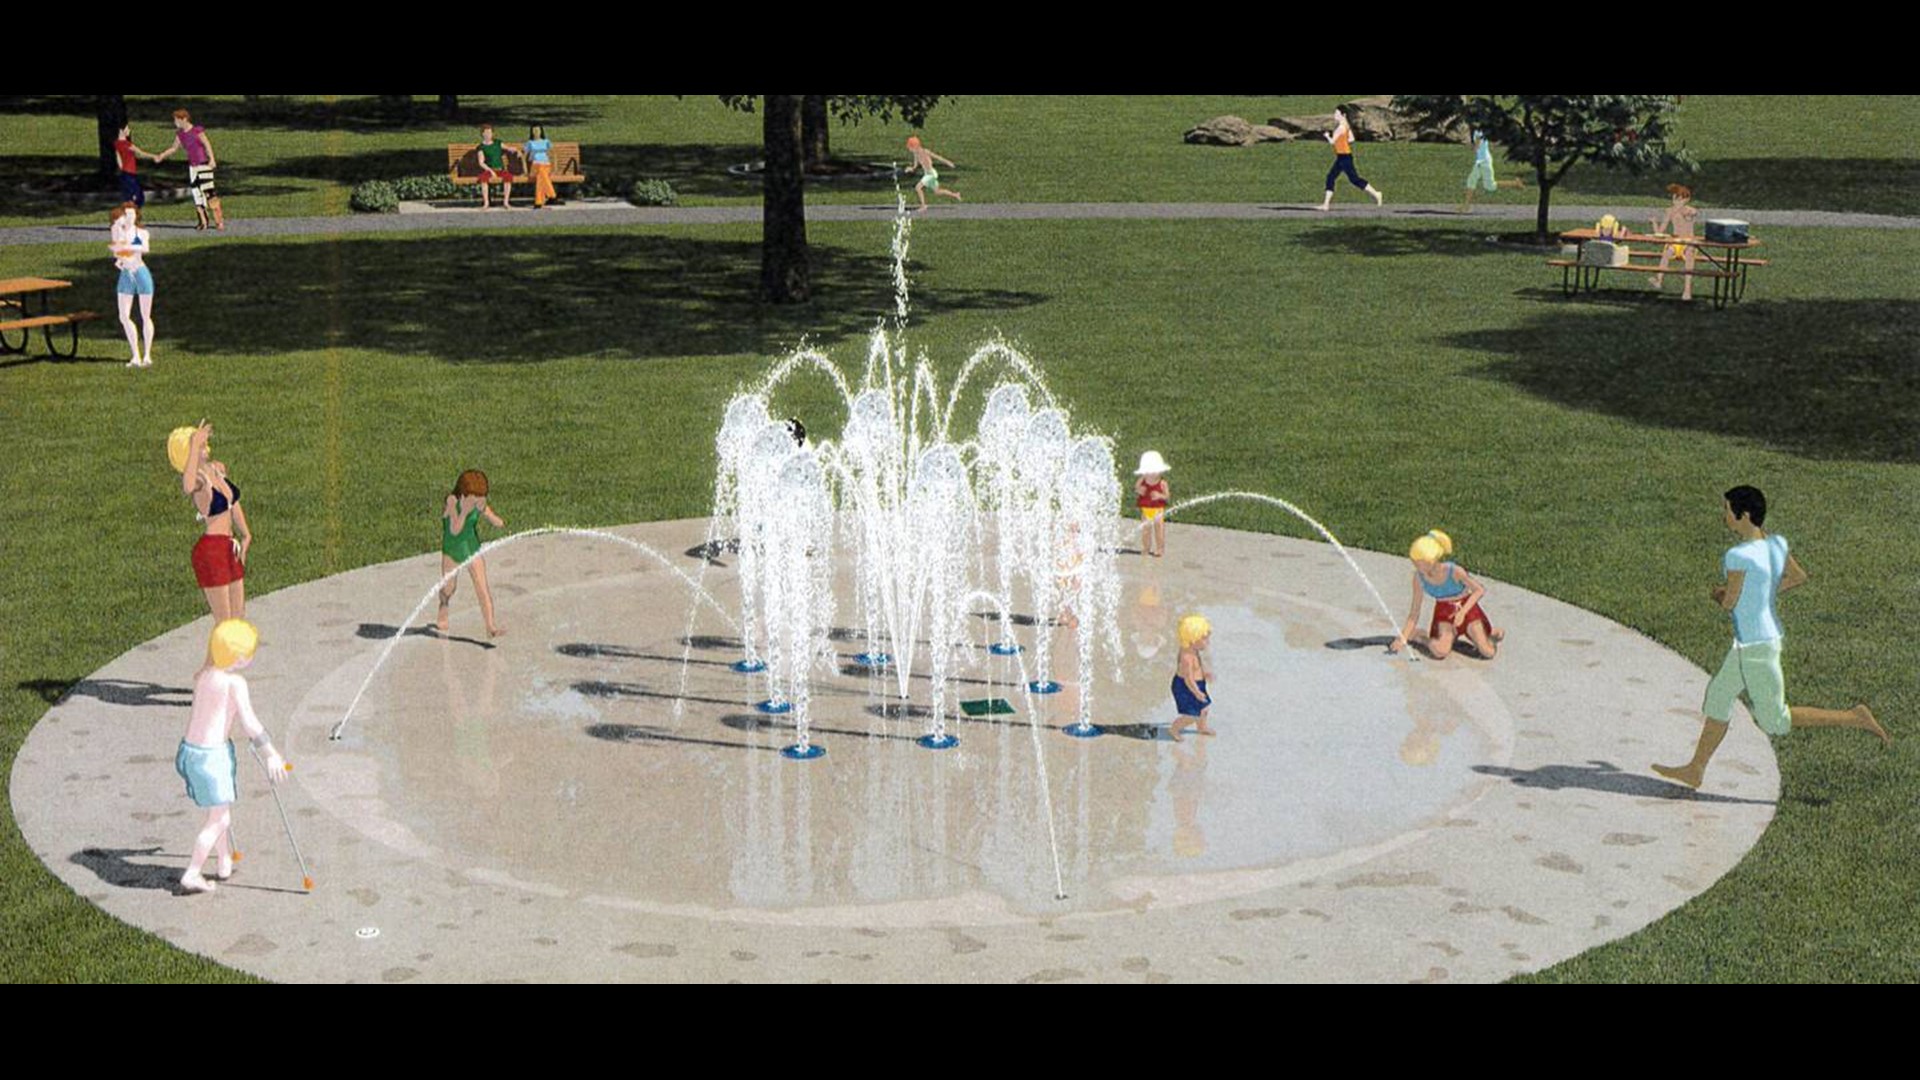 The splash pad is one of several upgrades slated for the downtown park